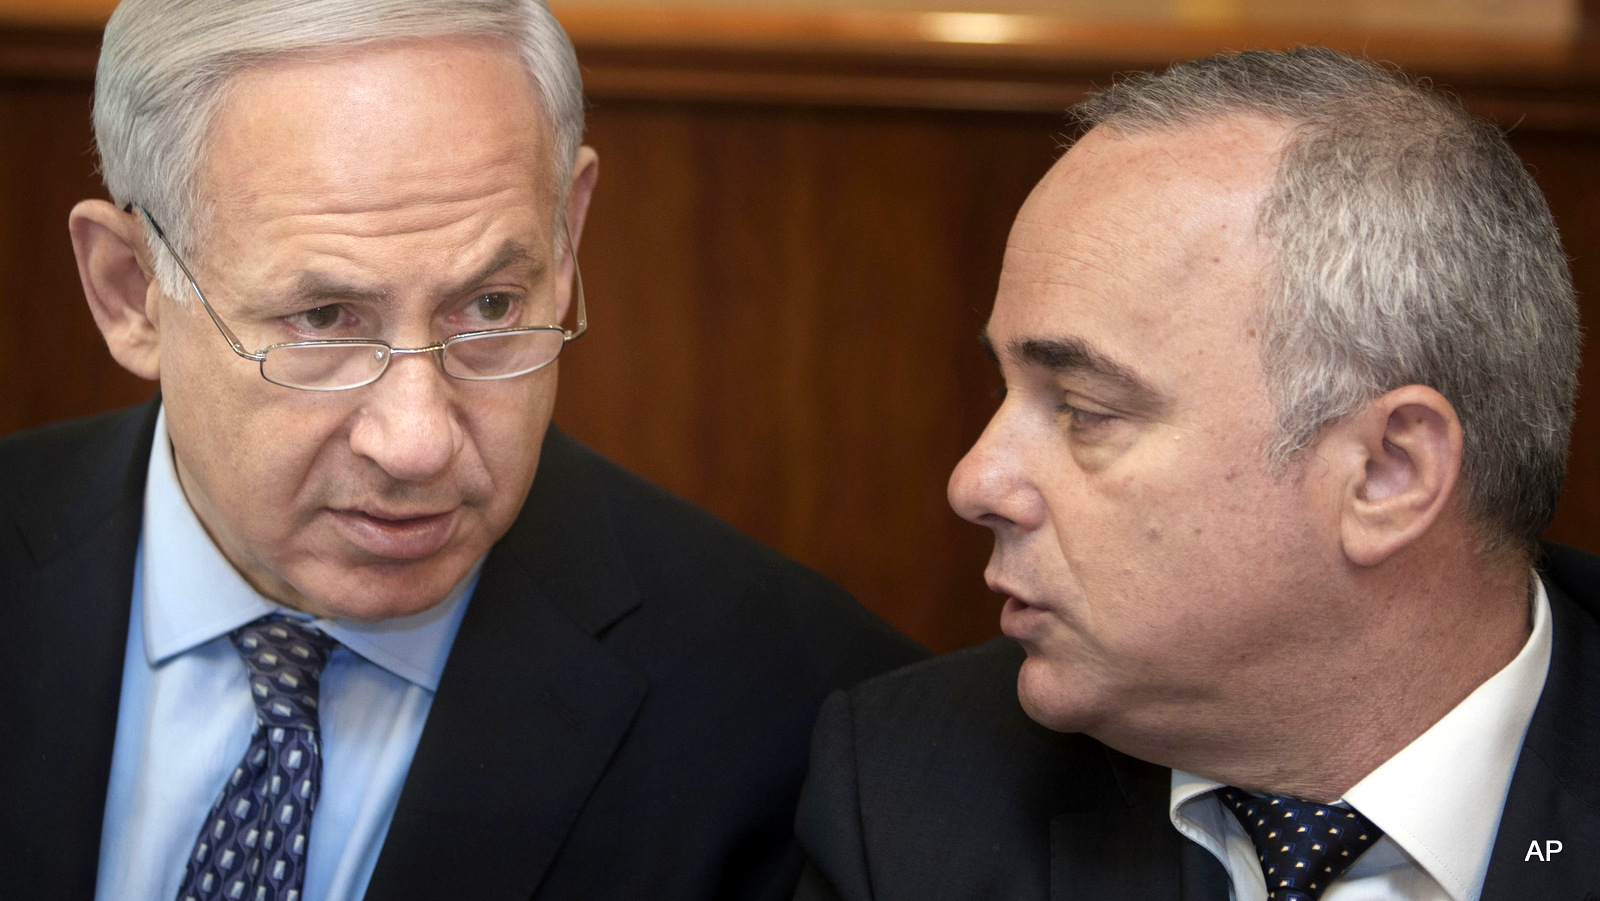 Israeli Prime Minister Benjamin Netanyahu, left, sits together with Finance Minister Yuval Steinitz, as they attend the weekly cabinet meeting in his Jerusalem office. Steinitz on Monday said taking military action against Iran’s nuclear program is still an option, despite last week’s framework deal between world powers and Iran